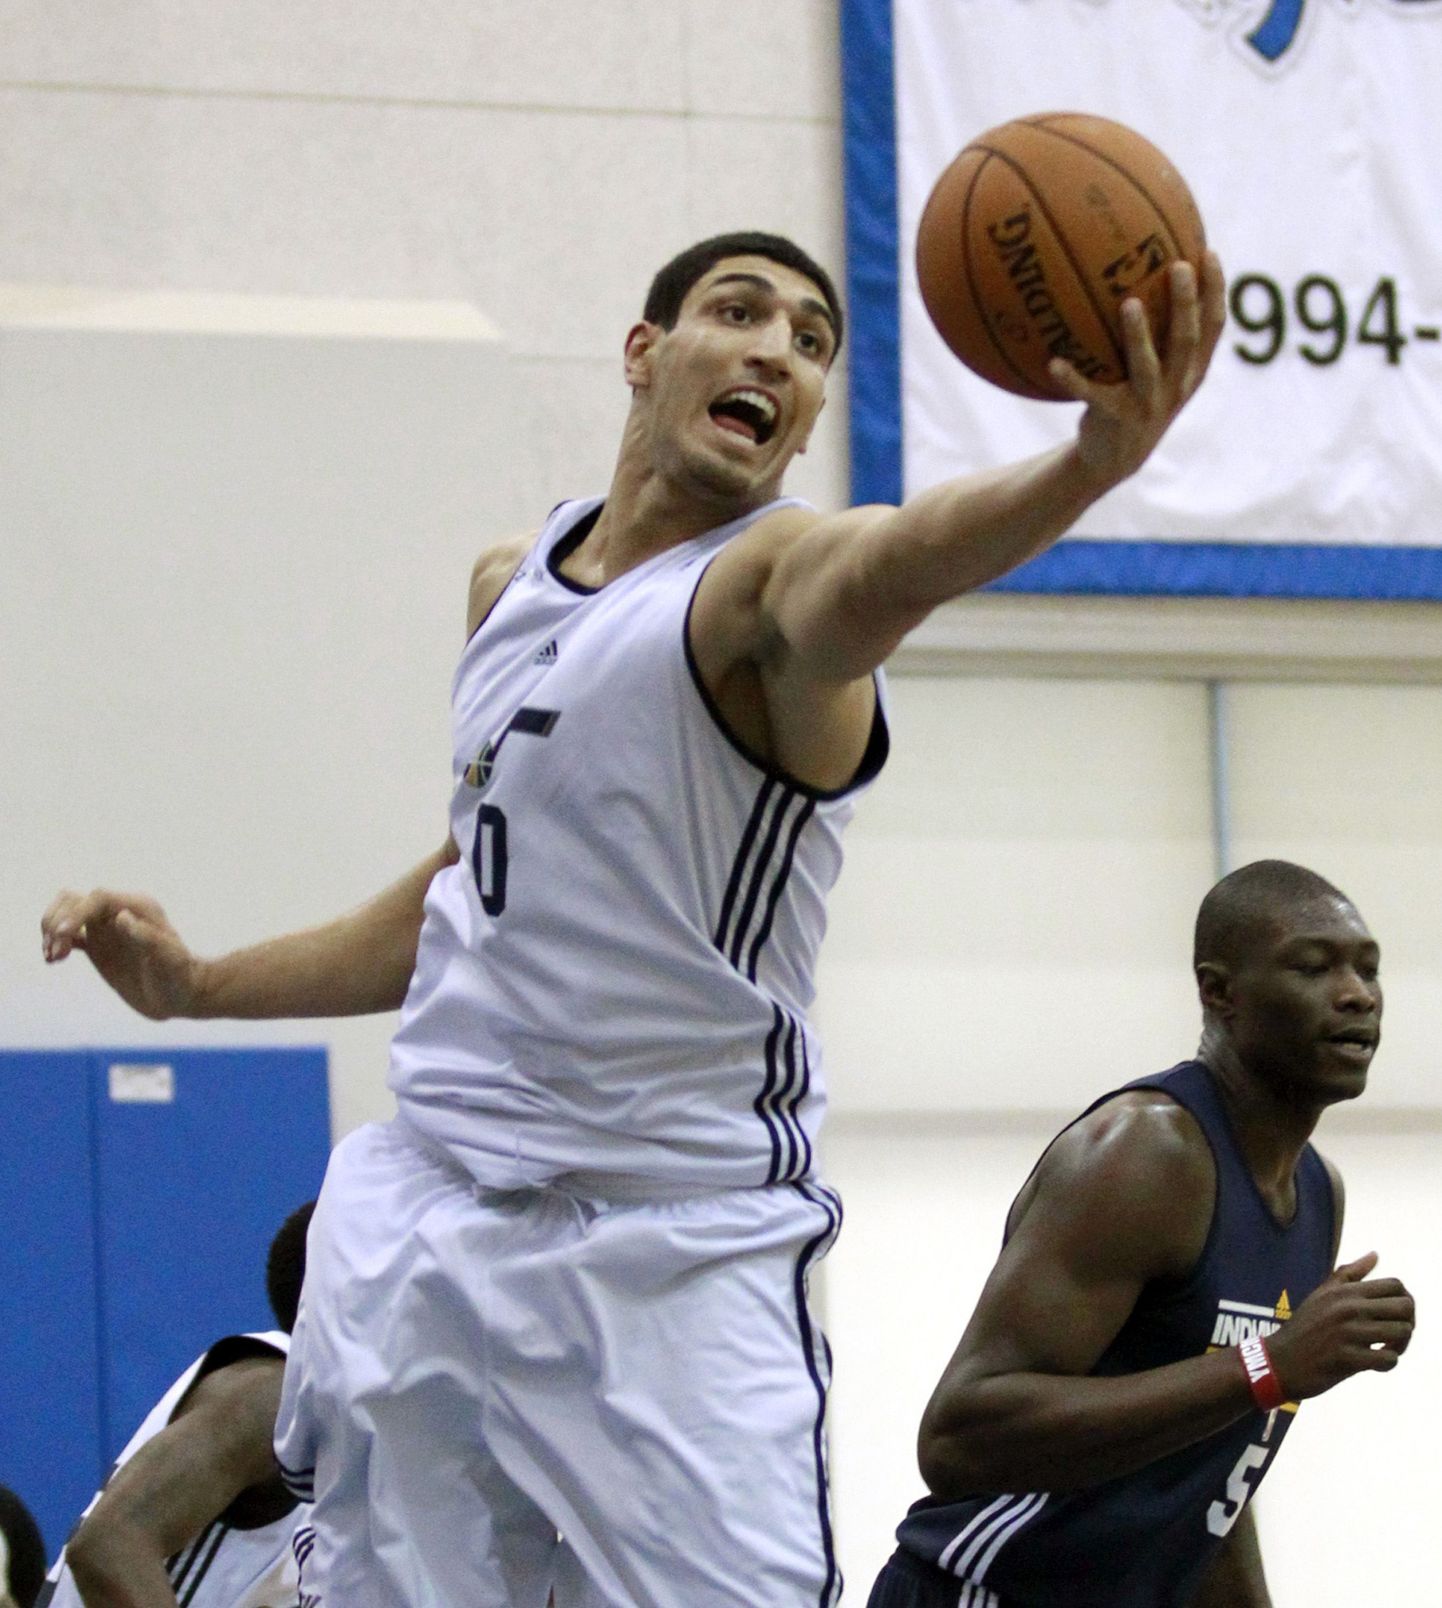 Utah Jazz's Enes Kanter, left, grabs a rebound in front of Indiana Pacers' Hamady N'diaye (5) during an NBA summer league basketball game, Thursday, July 12, 2012, in Orlando, Fla. (AP Photo/John Raoux)  / SCANPIX Code: 436